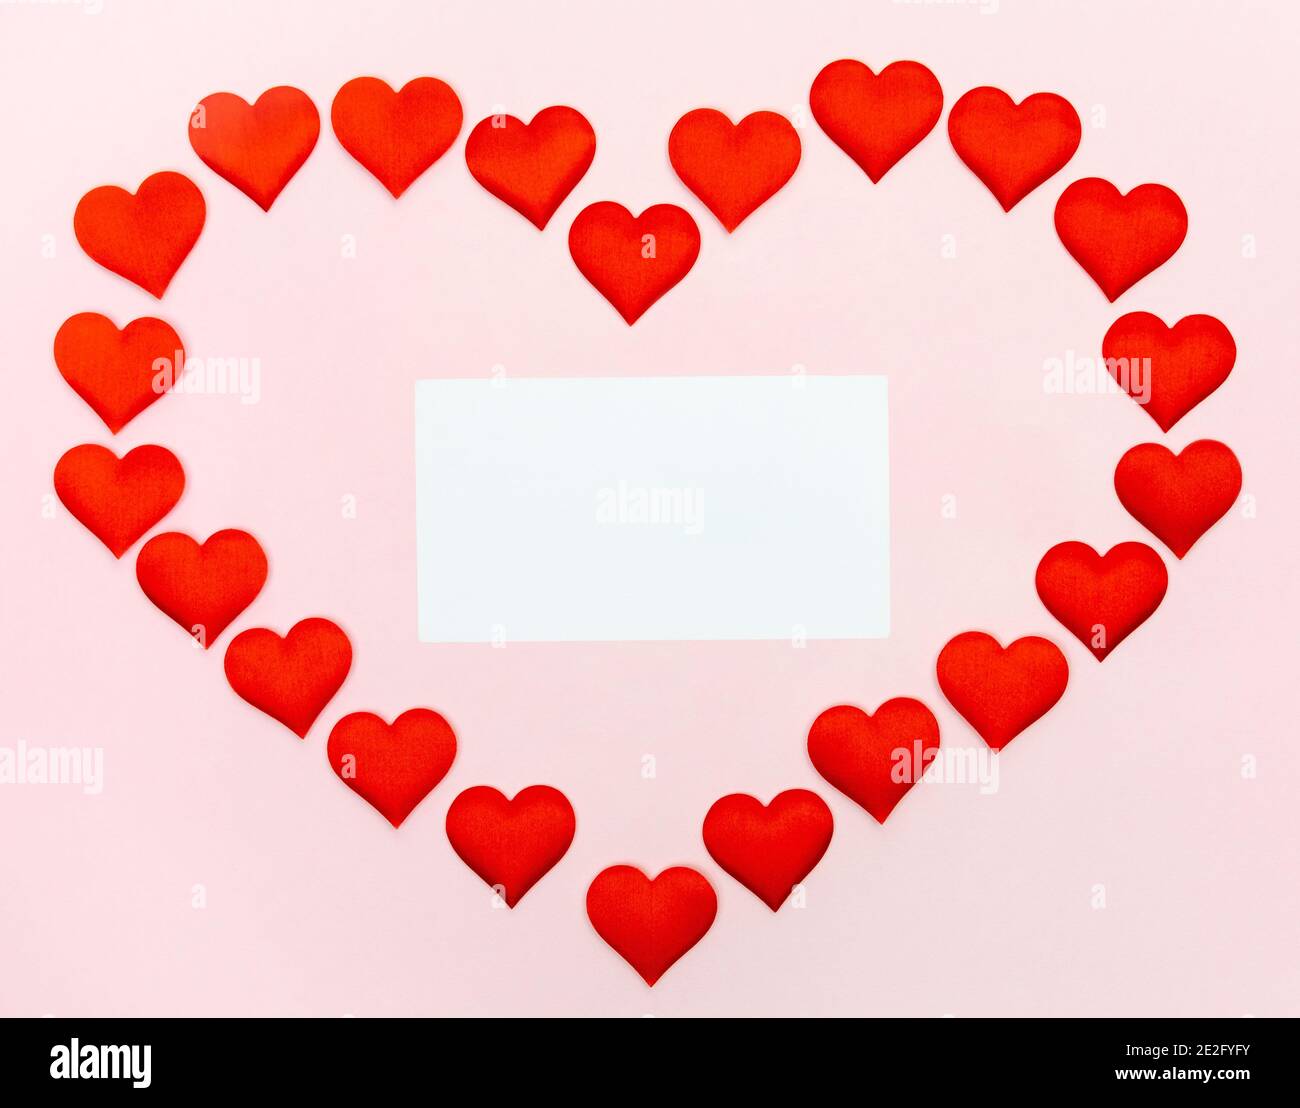 Big heart of small hearts with a sheet of paper inside mock-up on a pink background. Concept of holidays and Valentines Day. Stock Photo